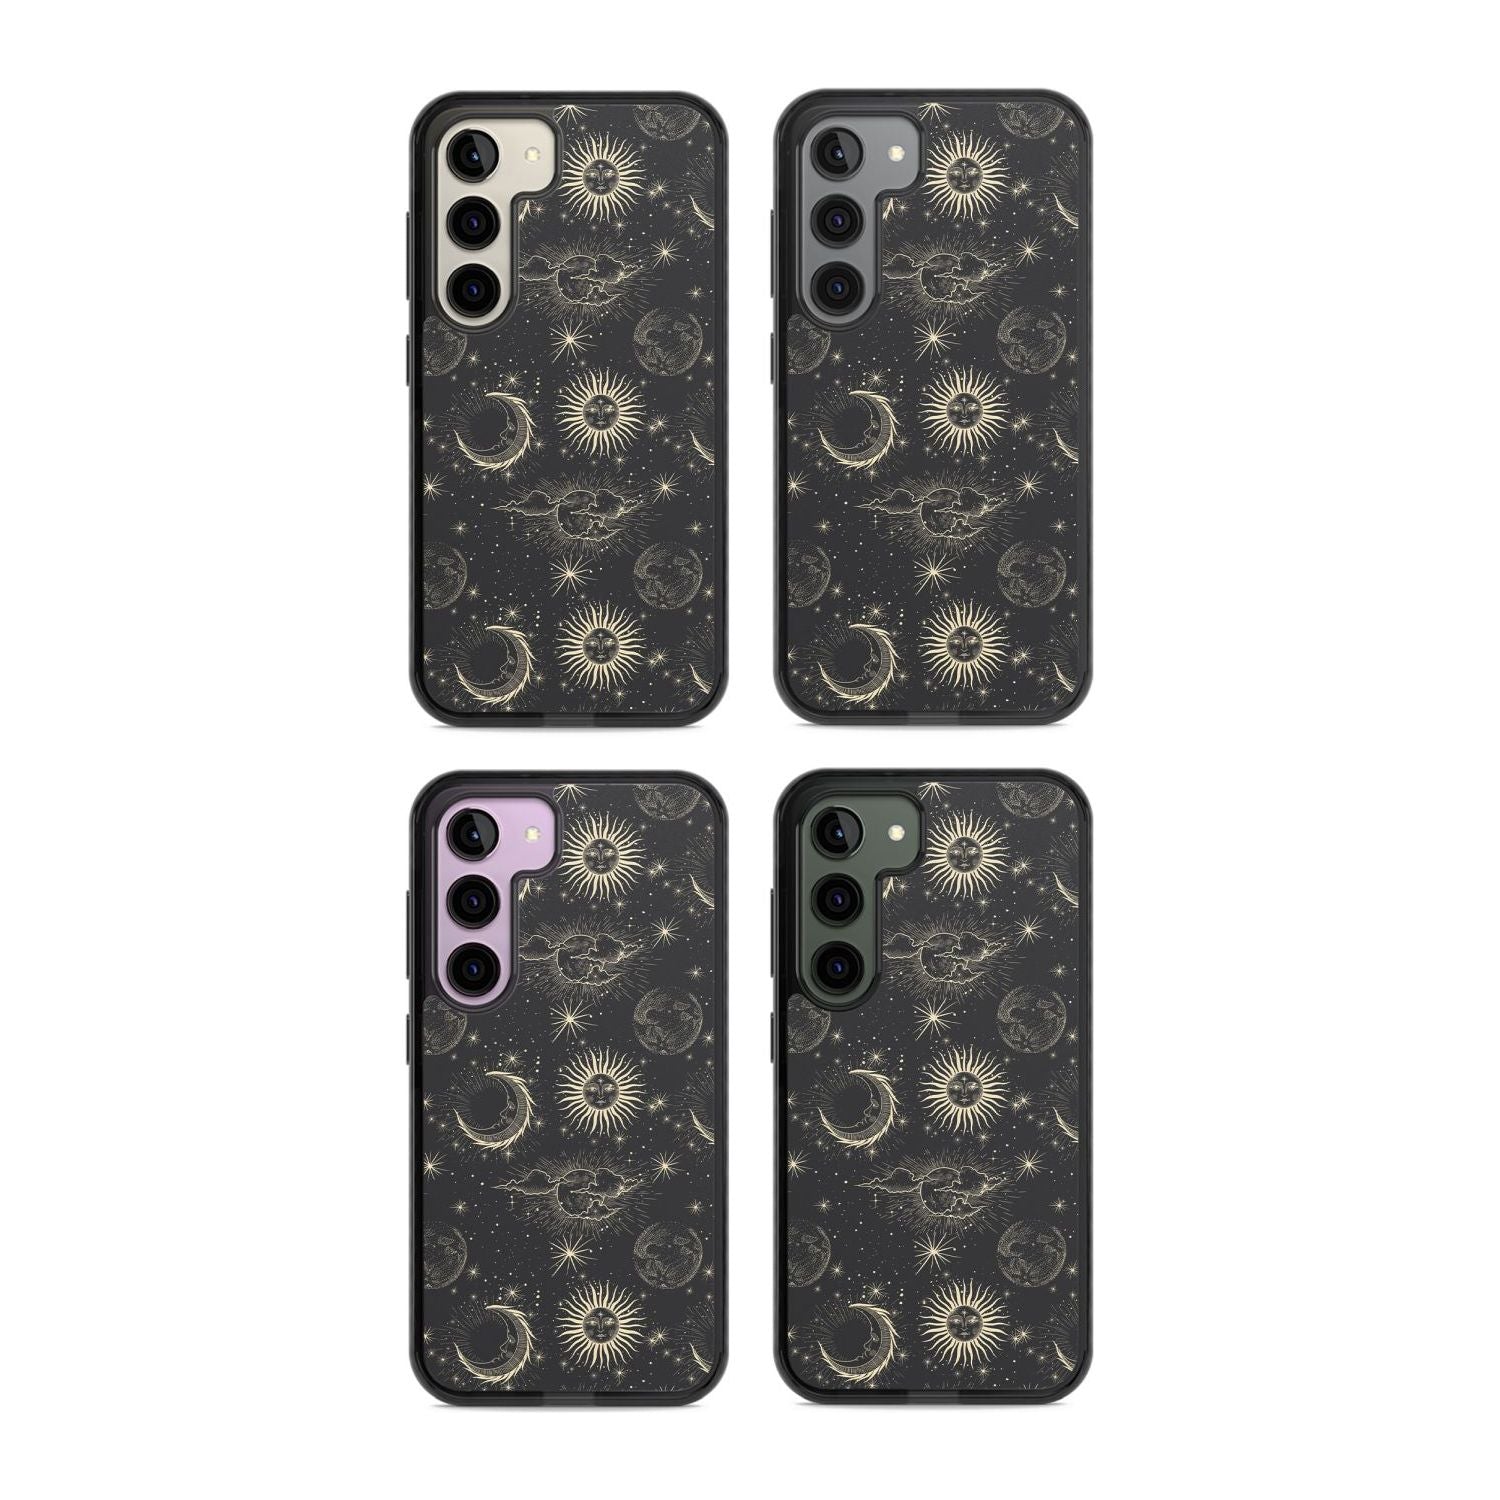 Large Suns, Moons & Clouds Astrological Phone Case iPhone 15 Pro Max / Black Impact Case,iPhone 15 Plus / Black Impact Case,iPhone 15 Pro / Black Impact Case,iPhone 15 / Black Impact Case,iPhone 15 Pro Max / Impact Case,iPhone 15 Plus / Impact Case,iPhone 15 Pro / Impact Case,iPhone 15 / Impact Case,iPhone 15 Pro Max / Magsafe Black Impact Case,iPhone 15 Plus / Magsafe Black Impact Case,iPhone 15 Pro / Magsafe Black Impact Case,iPhone 15 / Magsafe Black Impact Case,iPhone 14 Pro Max / Black Impact Case,iPho